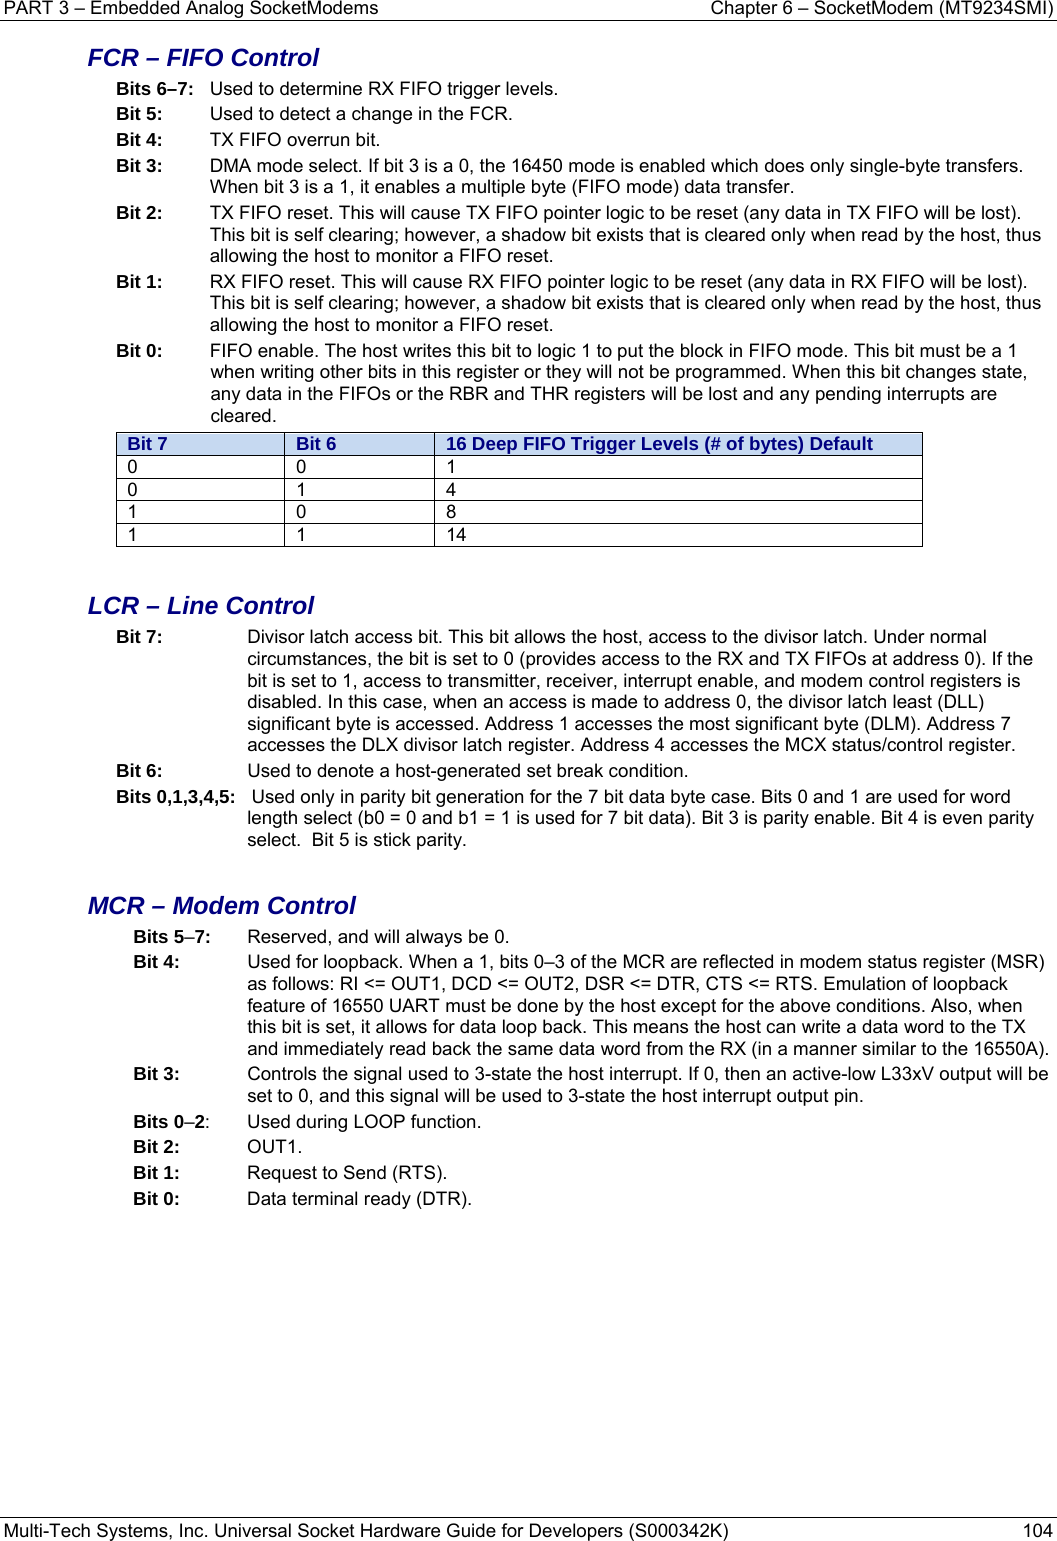 PART 3 – Embedded Analog SocketModems  Chapter 6 – SocketModem (MT9234SMI) Multi-Tech Systems, Inc. Universal Socket Hardware Guide for Developers (S000342K)  104  FCR – FIFO Control Bits 6–7:  Used to determine RX FIFO trigger levels. Bit 5:  Used to detect a change in the FCR. Bit 4:   TX FIFO overrun bit. Bit 3:   DMA mode select. If bit 3 is a 0, the 16450 mode is enabled which does only single-byte transfers. When bit 3 is a 1, it enables a multiple byte (FIFO mode) data transfer. Bit 2:   TX FIFO reset. This will cause TX FIFO pointer logic to be reset (any data in TX FIFO will be lost). This bit is self clearing; however, a shadow bit exists that is cleared only when read by the host, thus allowing the host to monitor a FIFO reset. Bit 1:   RX FIFO reset. This will cause RX FIFO pointer logic to be reset (any data in RX FIFO will be lost). This bit is self clearing; however, a shadow bit exists that is cleared only when read by the host, thus allowing the host to monitor a FIFO reset. Bit 0:   FIFO enable. The host writes this bit to logic 1 to put the block in FIFO mode. This bit must be a 1 when writing other bits in this register or they will not be programmed. When this bit changes state, any data in the FIFOs or the RBR and THR registers will be lost and any pending interrupts are cleared. Bit 7  Bit 6  16 Deep FIFO Trigger Levels (# of bytes) Default 0 0 1 0 1 4 1 0 8 1 1 14  LCR – Line Control Bit 7:   Divisor latch access bit. This bit allows the host, access to the divisor latch. Under normal circumstances, the bit is set to 0 (provides access to the RX and TX FIFOs at address 0). If the bit is set to 1, access to transmitter, receiver, interrupt enable, and modem control registers is disabled. In this case, when an access is made to address 0, the divisor latch least (DLL) significant byte is accessed. Address 1 accesses the most significant byte (DLM). Address 7 accesses the DLX divisor latch register. Address 4 accesses the MCX status/control register. Bit 6:   Used to denote a host-generated set break condition. Bits 0,1,3,4,5:   Used only in parity bit generation for the 7 bit data byte case. Bits 0 and 1 are used for word length select (b0 = 0 and b1 = 1 is used for 7 bit data). Bit 3 is parity enable. Bit 4 is even parity select.  Bit 5 is stick parity.  MCR – Modem Control Bits 5–7:  Reserved, and will always be 0. Bit 4:   Used for loopback. When a 1, bits 0–3 of the MCR are reflected in modem status register (MSR) as follows: RI &lt;= OUT1, DCD &lt;= OUT2, DSR &lt;= DTR, CTS &lt;= RTS. Emulation of loopback feature of 16550 UART must be done by the host except for the above conditions. Also, when this bit is set, it allows for data loop back. This means the host can write a data word to the TX and immediately read back the same data word from the RX (in a manner similar to the 16550A). Bit 3:   Controls the signal used to 3-state the host interrupt. If 0, then an active-low L33xV output will be set to 0, and this signal will be used to 3-state the host interrupt output pin. Bits 0–2:  Used during LOOP function. Bit 2:  OUT1. Bit 1:   Request to Send (RTS). Bit 0:   Data terminal ready (DTR).   